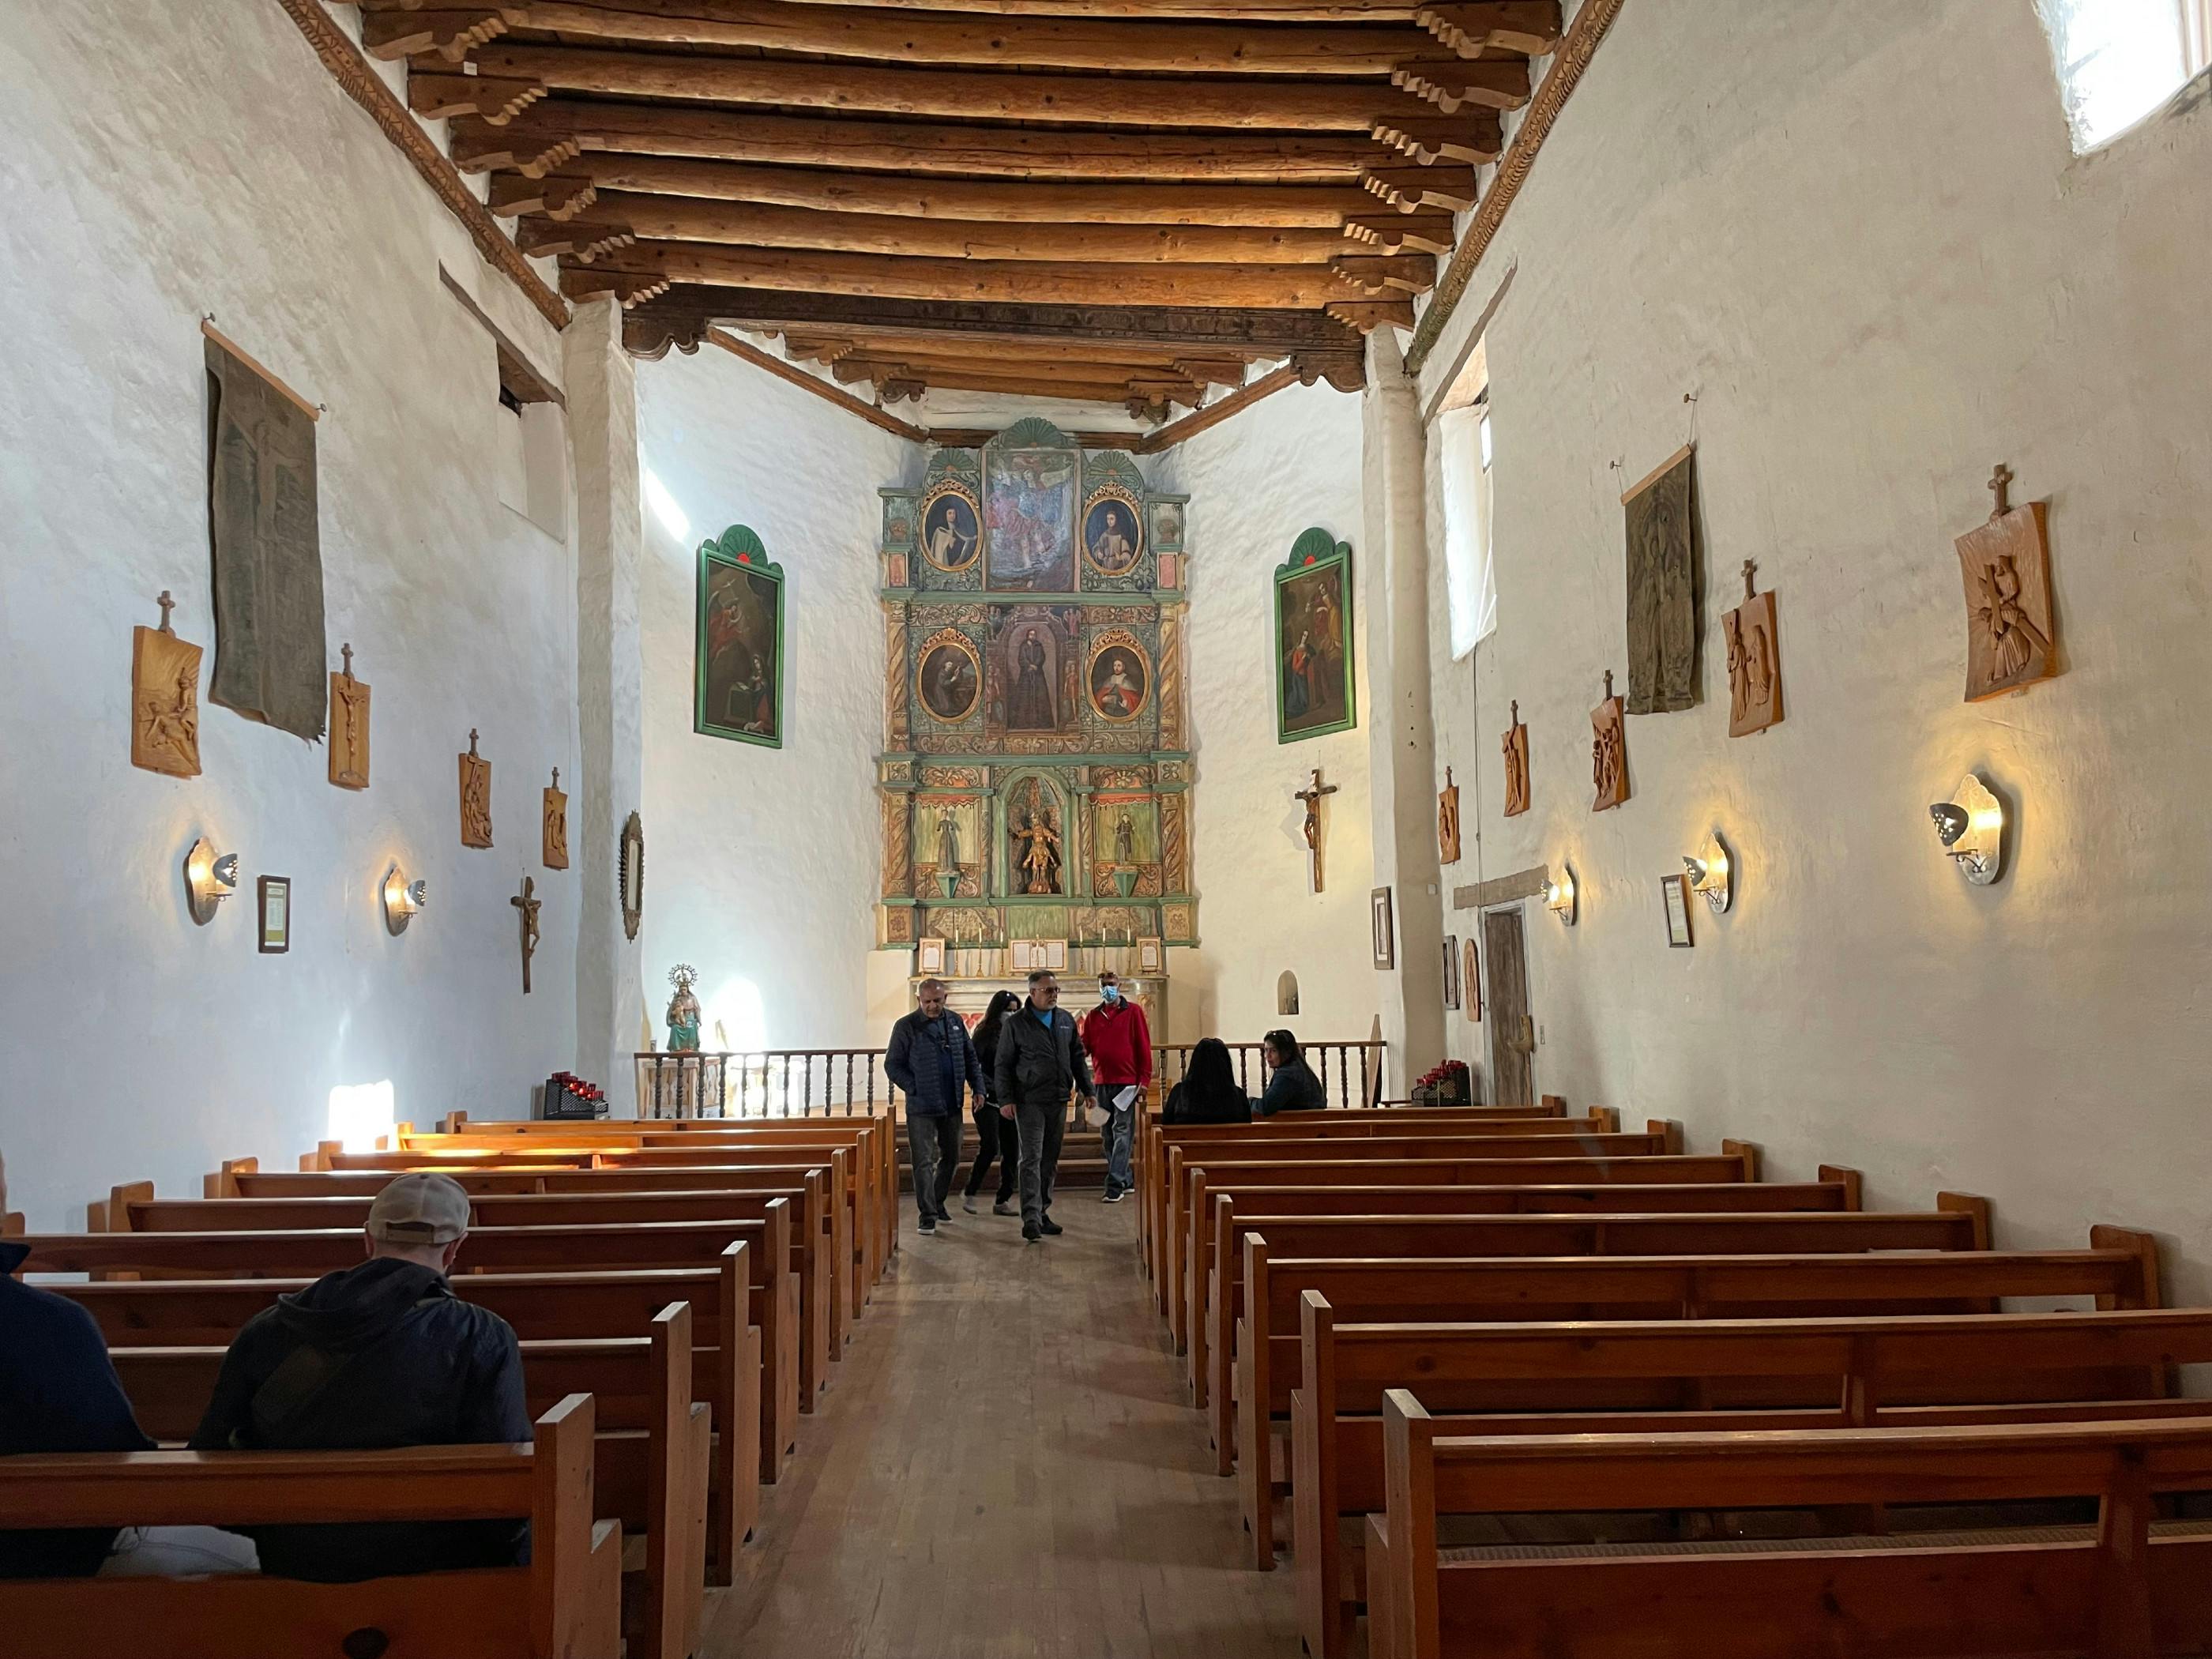 San Miguel Chapel in Santa Fe is the oldest church in the 50 states.